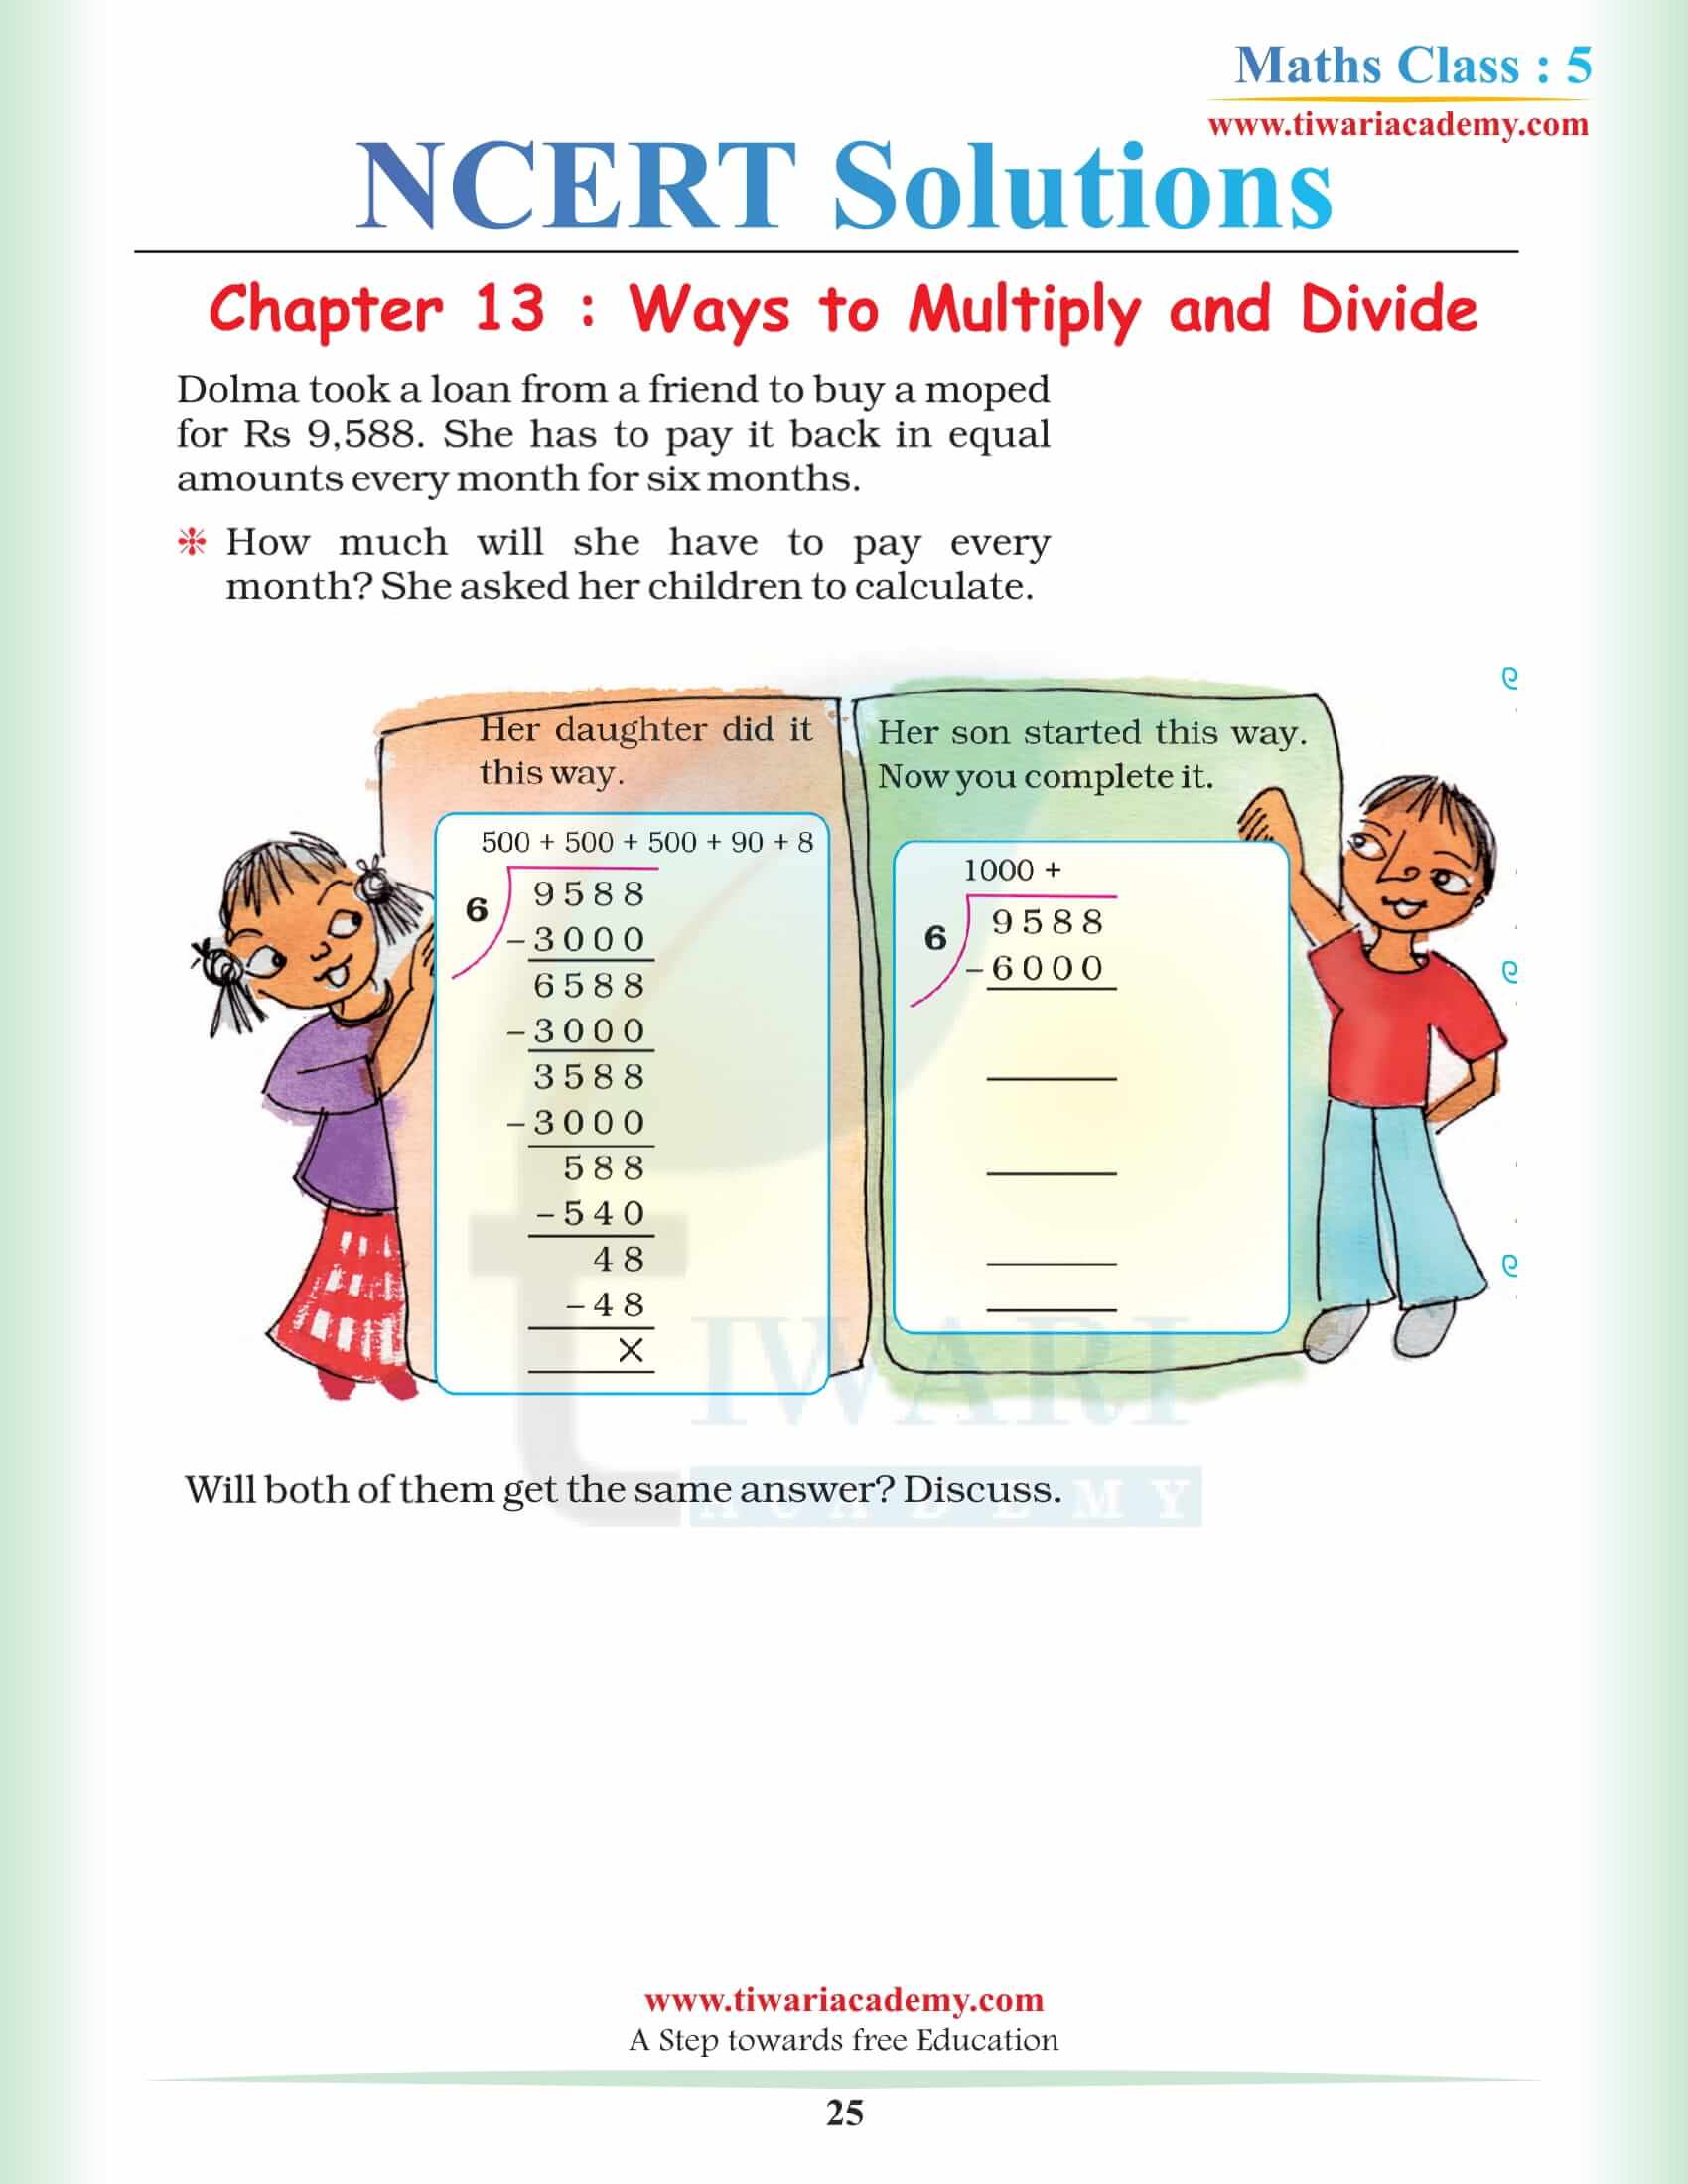 5th Maths Chapter 13 NCERT Solutions in English Medium